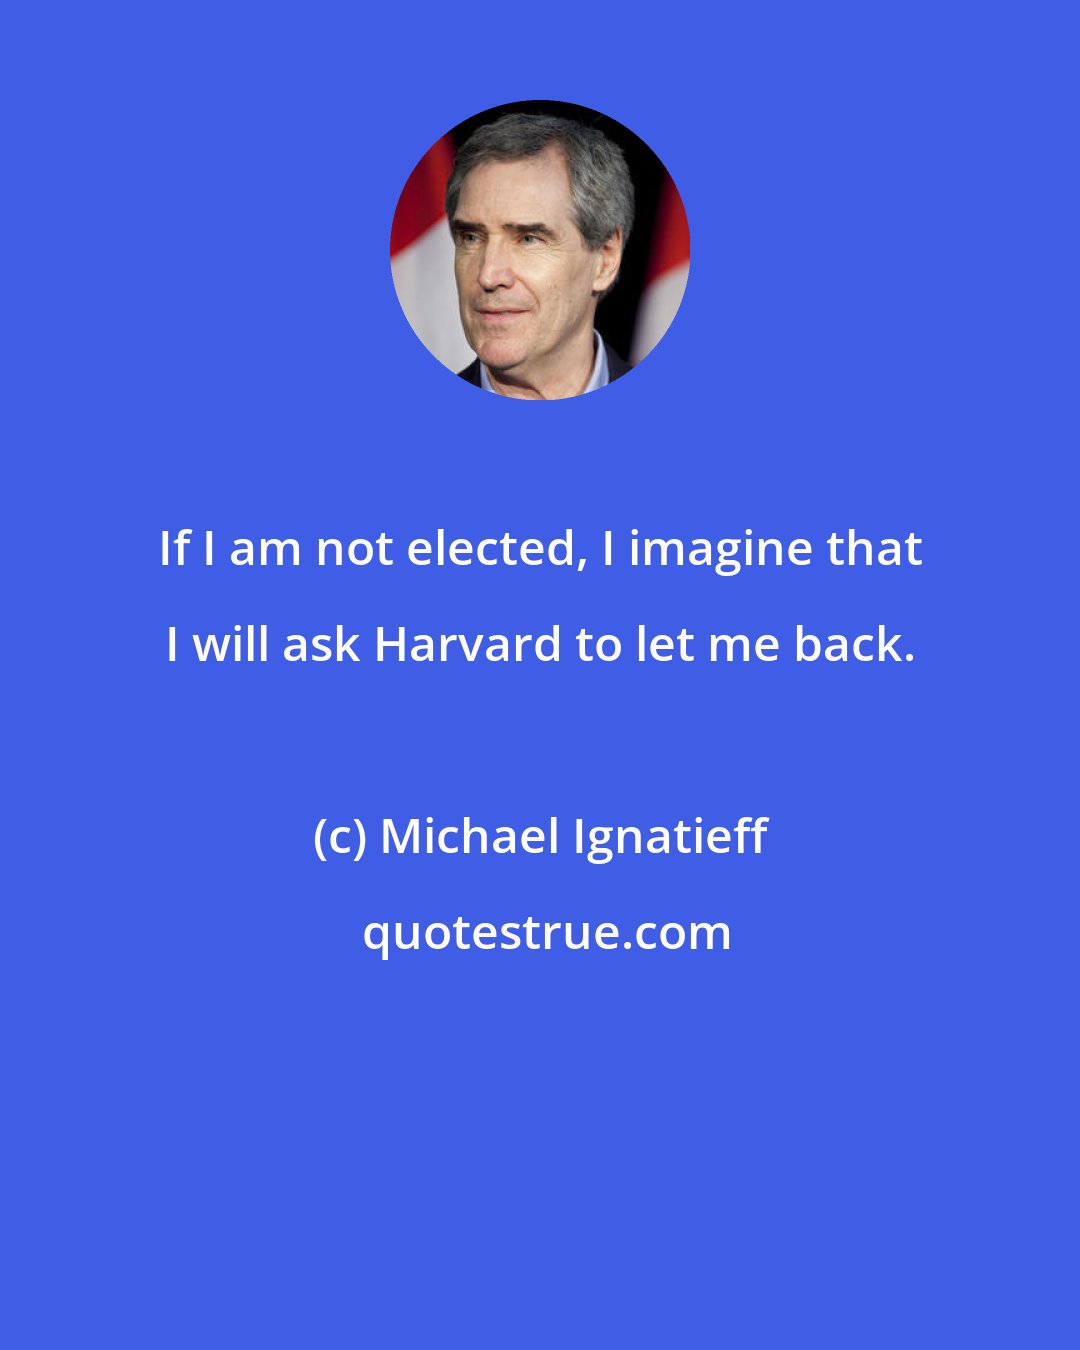 Michael Ignatieff: If I am not elected, I imagine that I will ask Harvard to let me back.